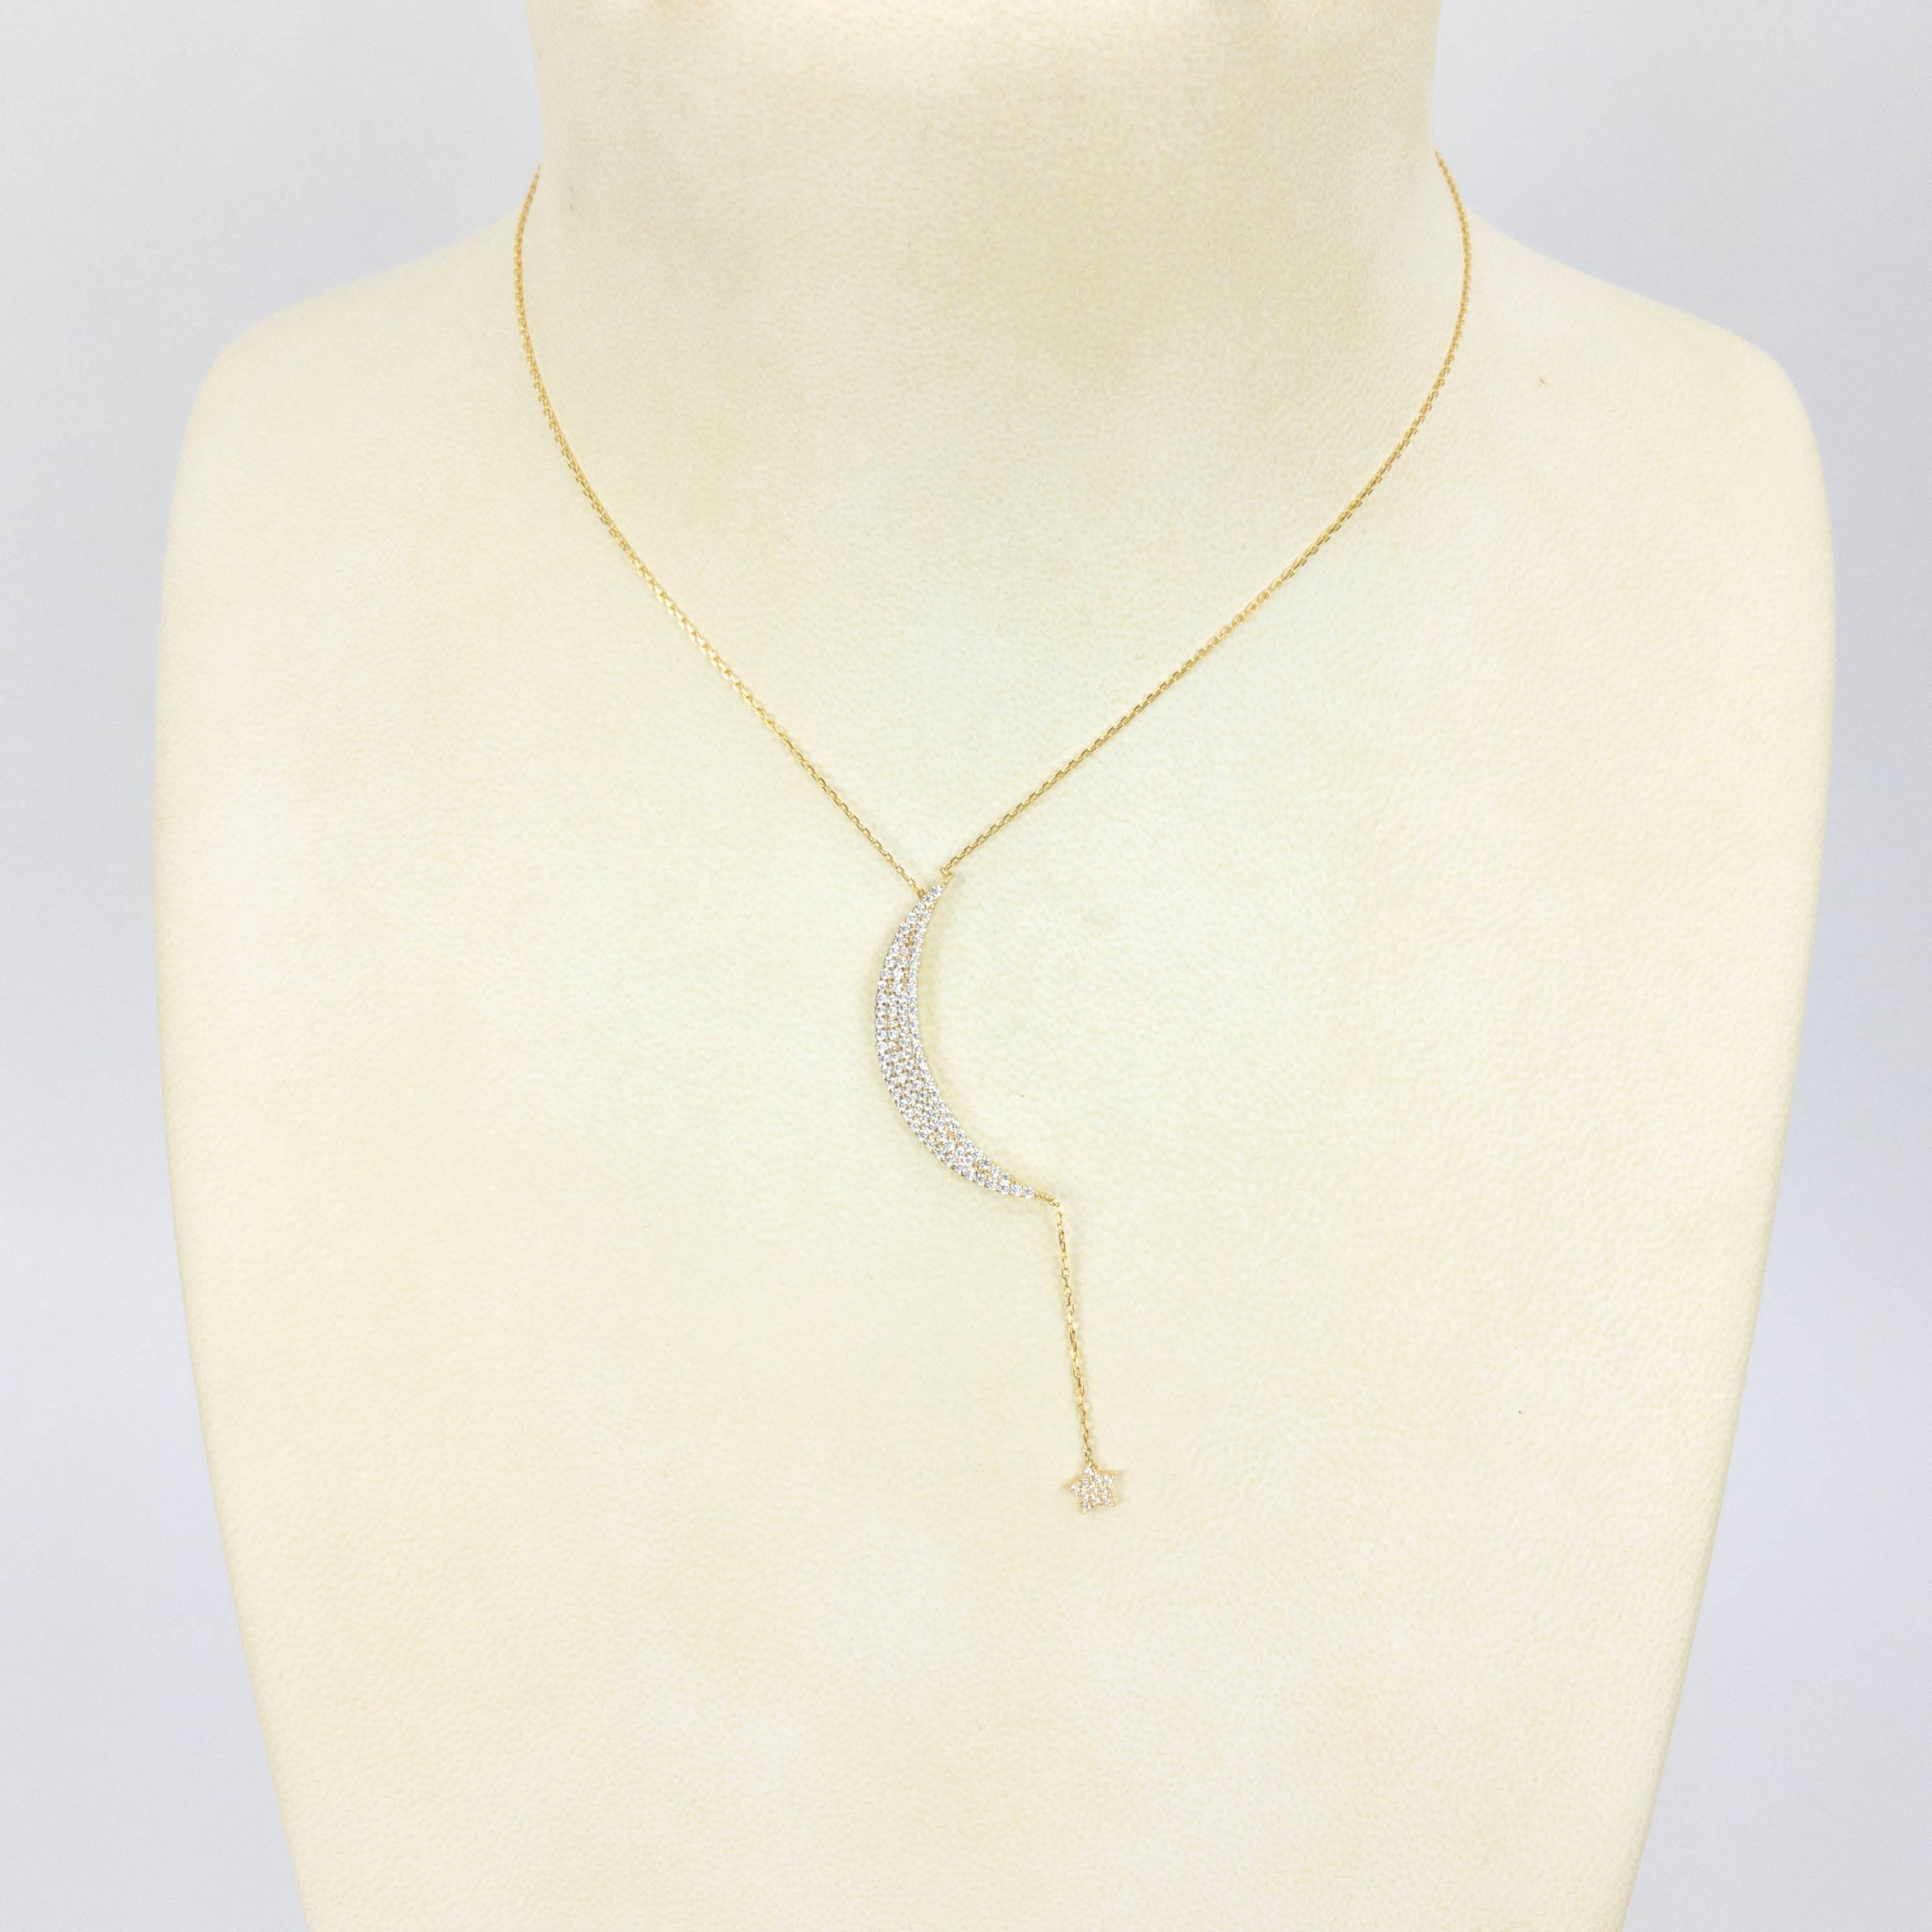 Modernist Moon and Star Gilt Sterling Silver Pendant Necklace